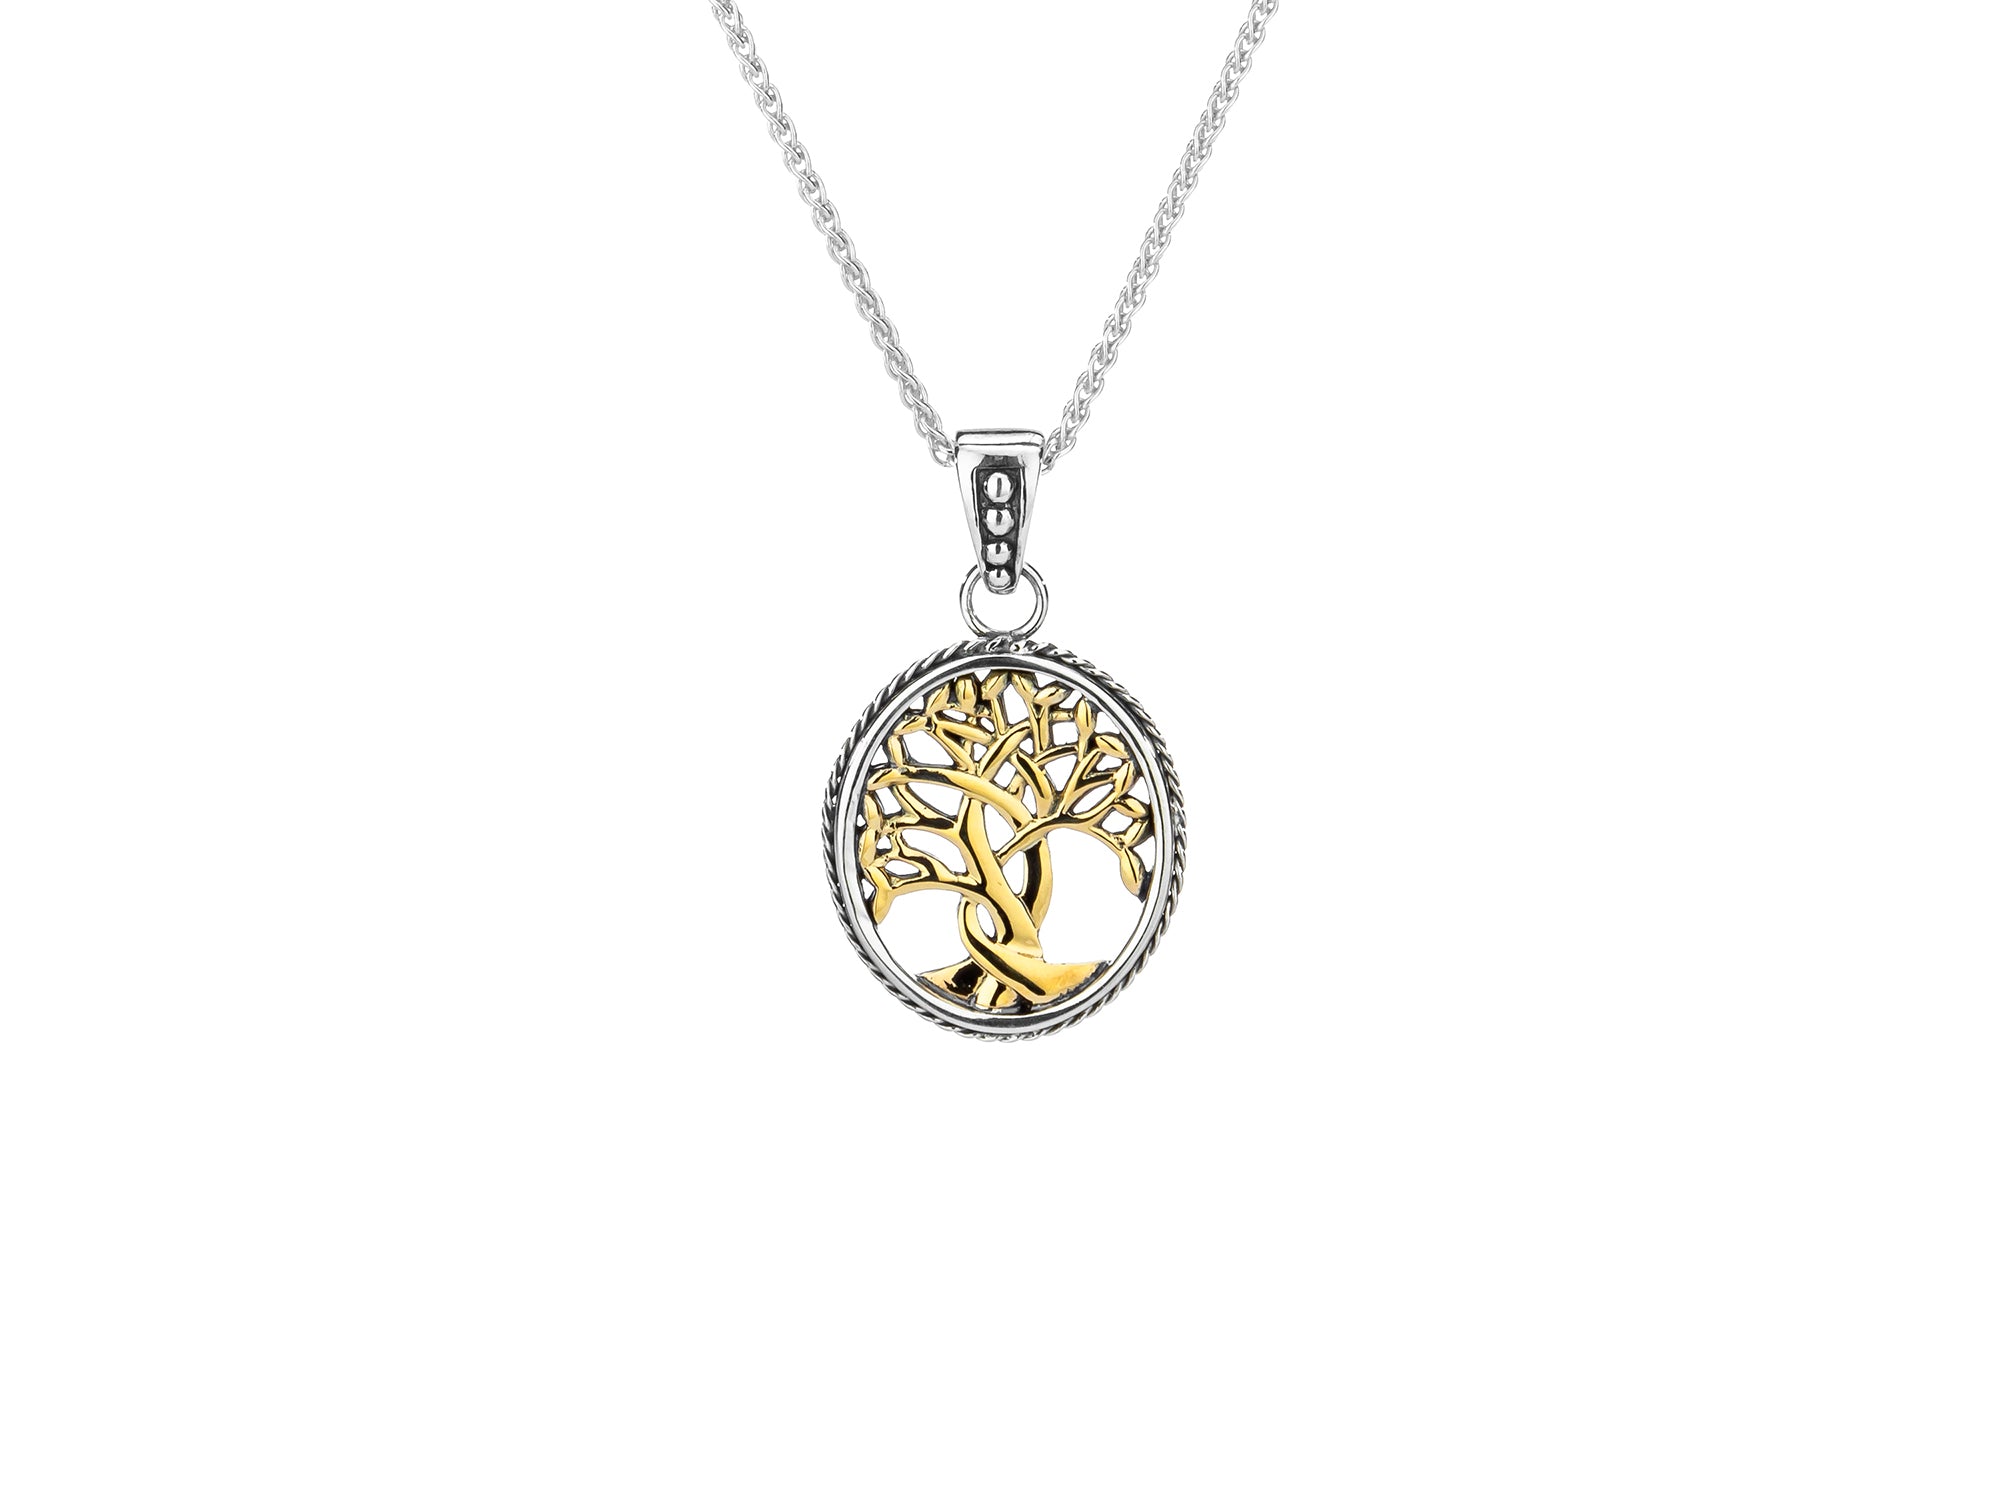 10K Yellow Gold and Sterling Silver Tree of Life Small Pendant